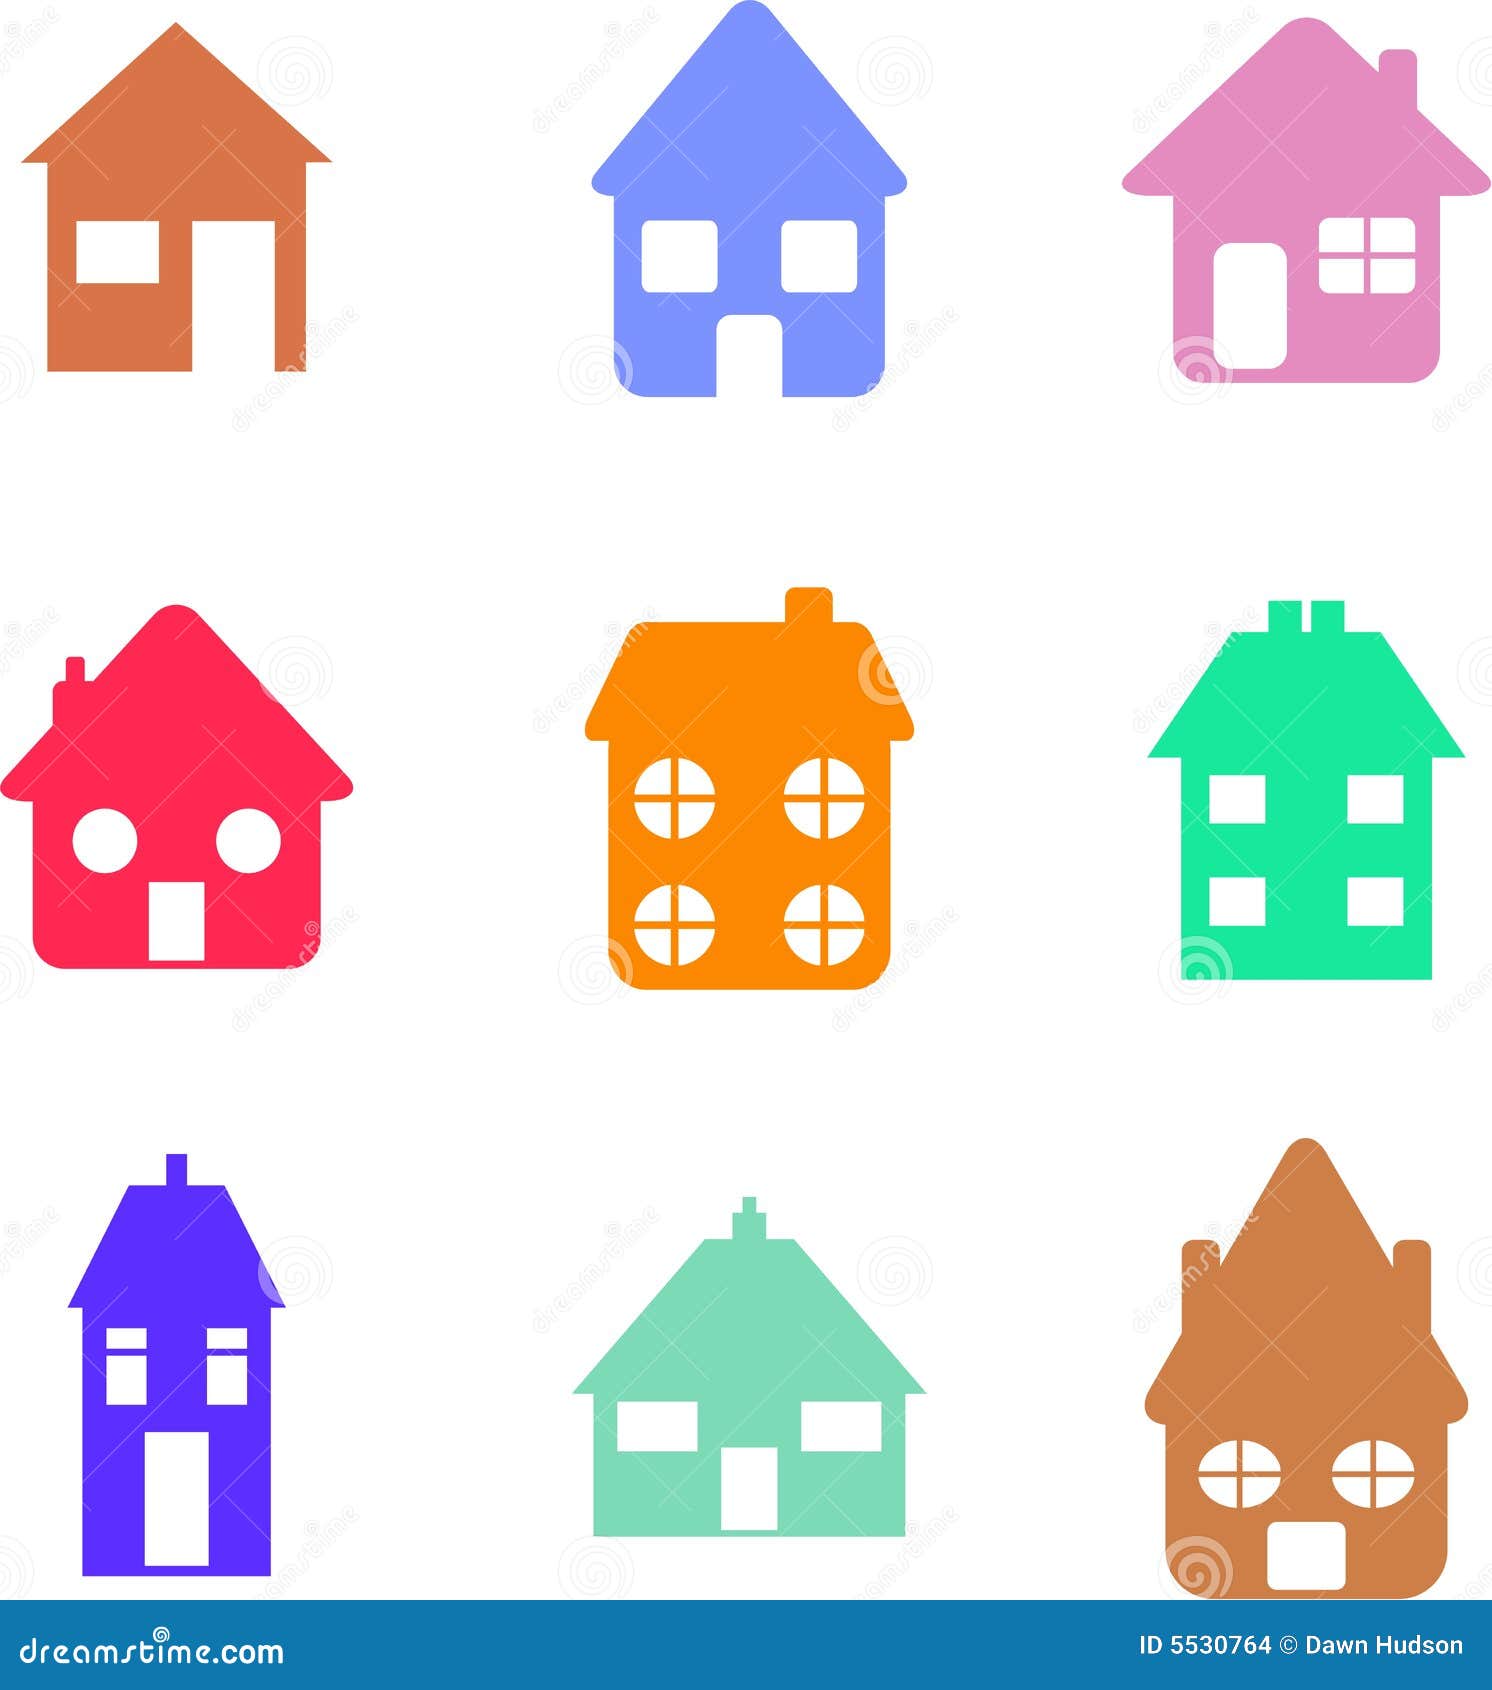 Home Shapes Stock Images - Image: 5530764